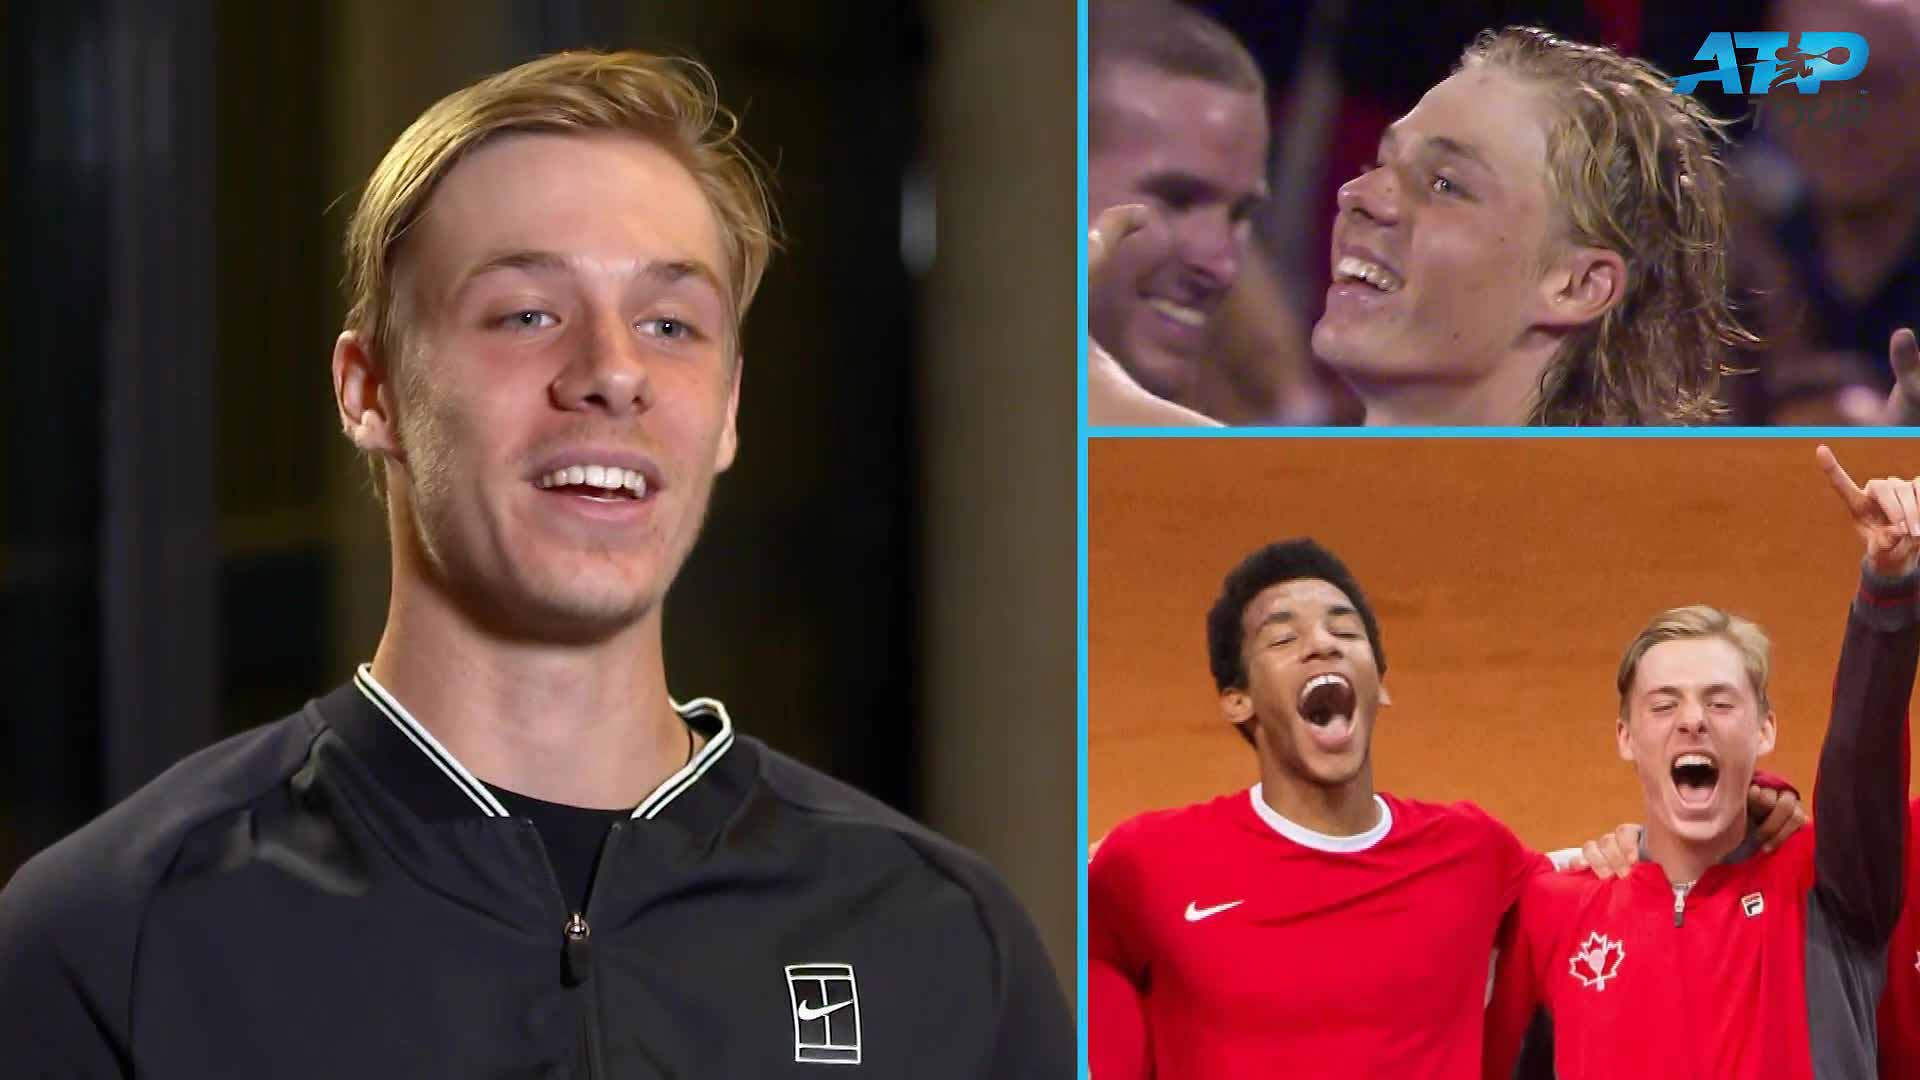 Denis Shapovalov remembers the time he stayed at Felix Auger-Aliassime's house and took down Rafael Nadal's poster.